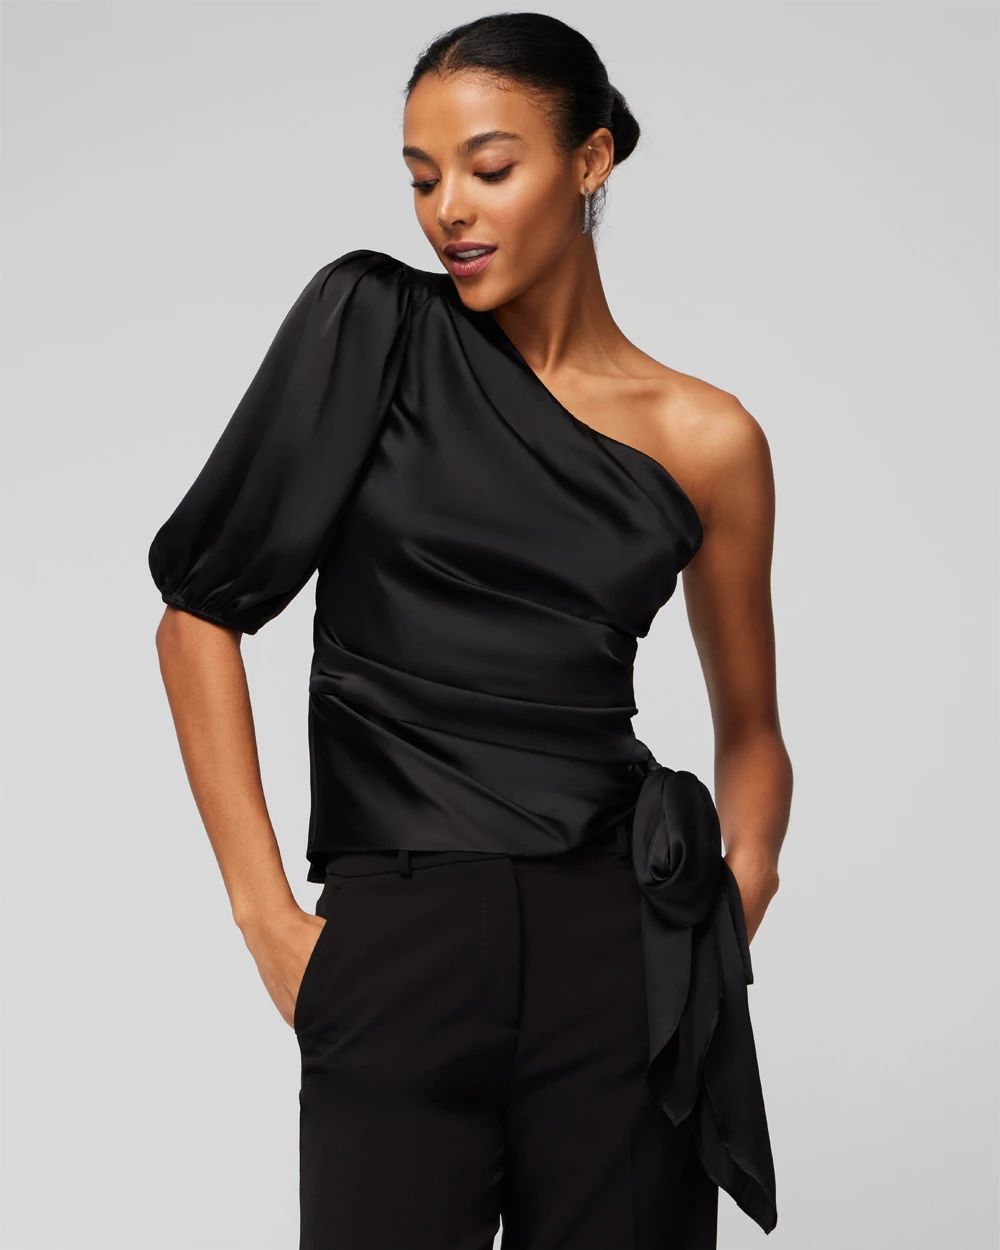 One Shoulder Satin Tie Blouse click to view larger image.